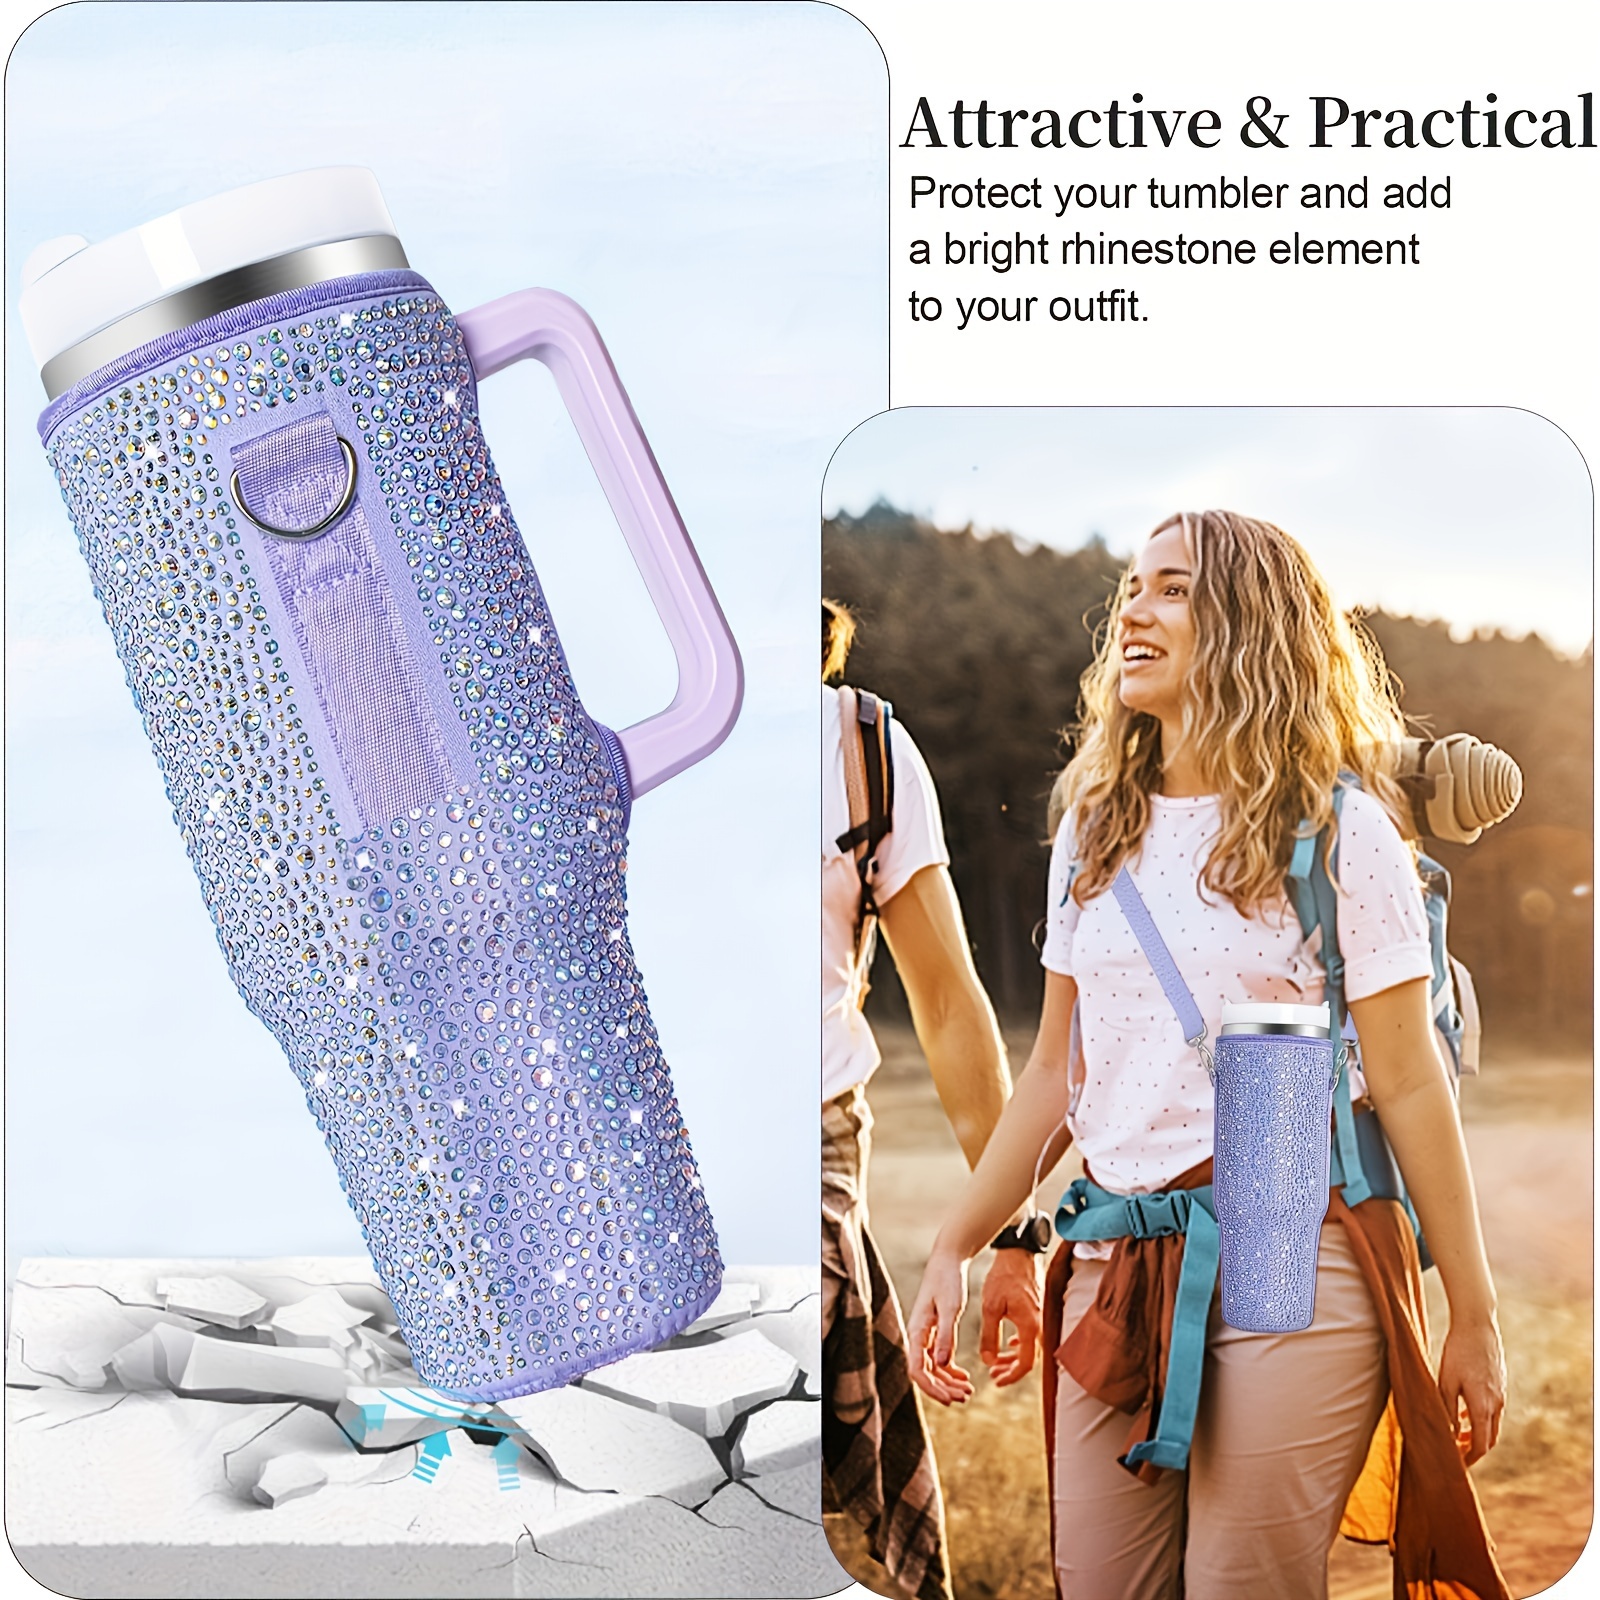 Water Bottle Carrier With Phone Pocket For Stanley Quencher 40 Oz Tumbler  With Handle, Stanley Cup Accessories For Travelling Hiking